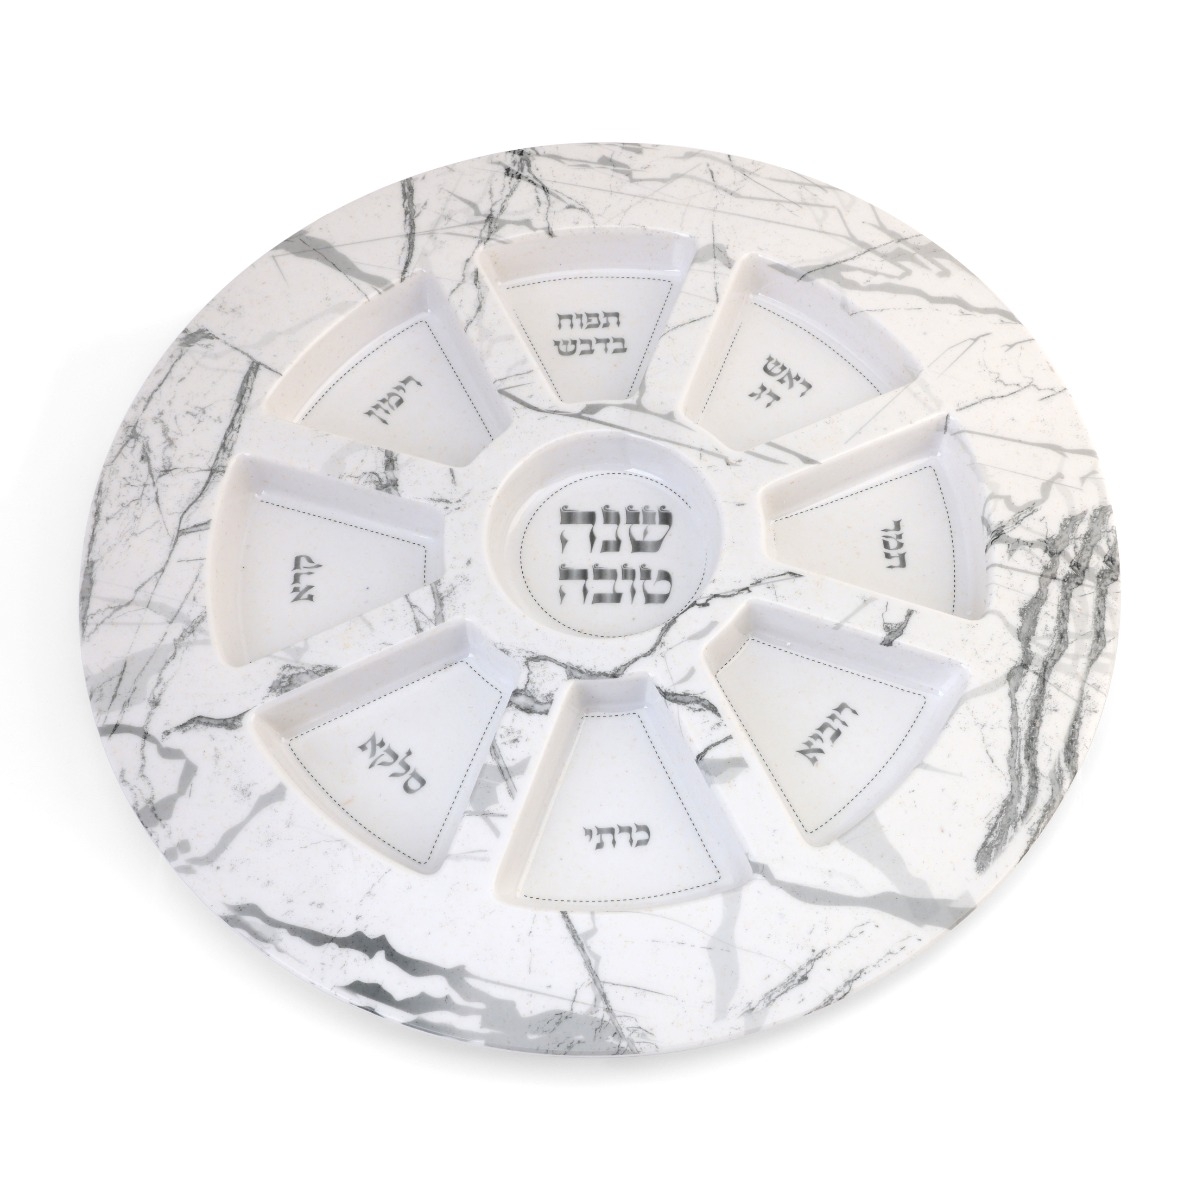 Bamboo Rosh Hashanah Seder Plate with Marble Design - 1